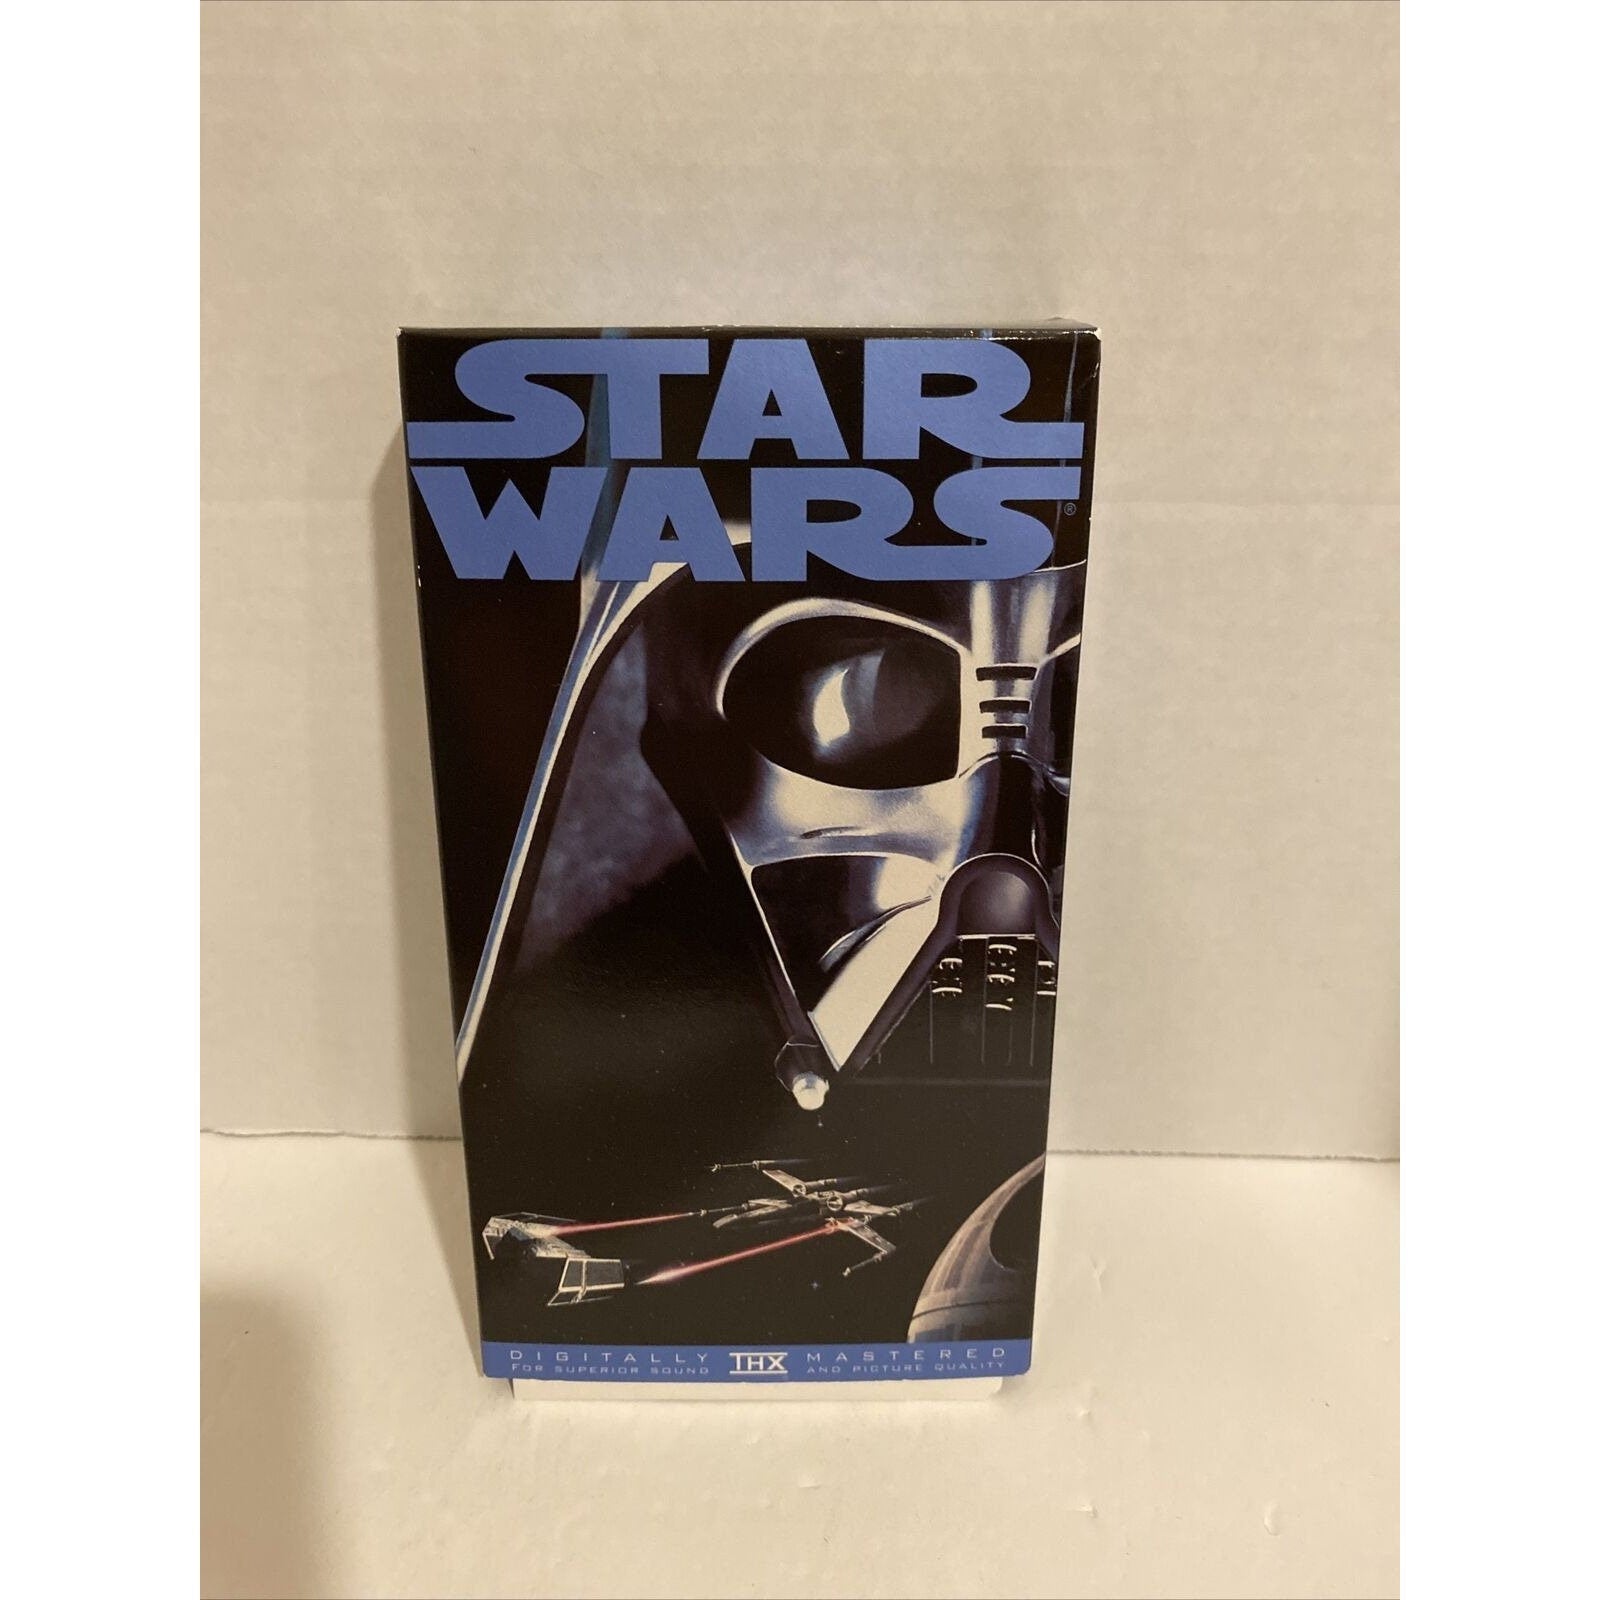 Star Wars A NEW HOPE VHS